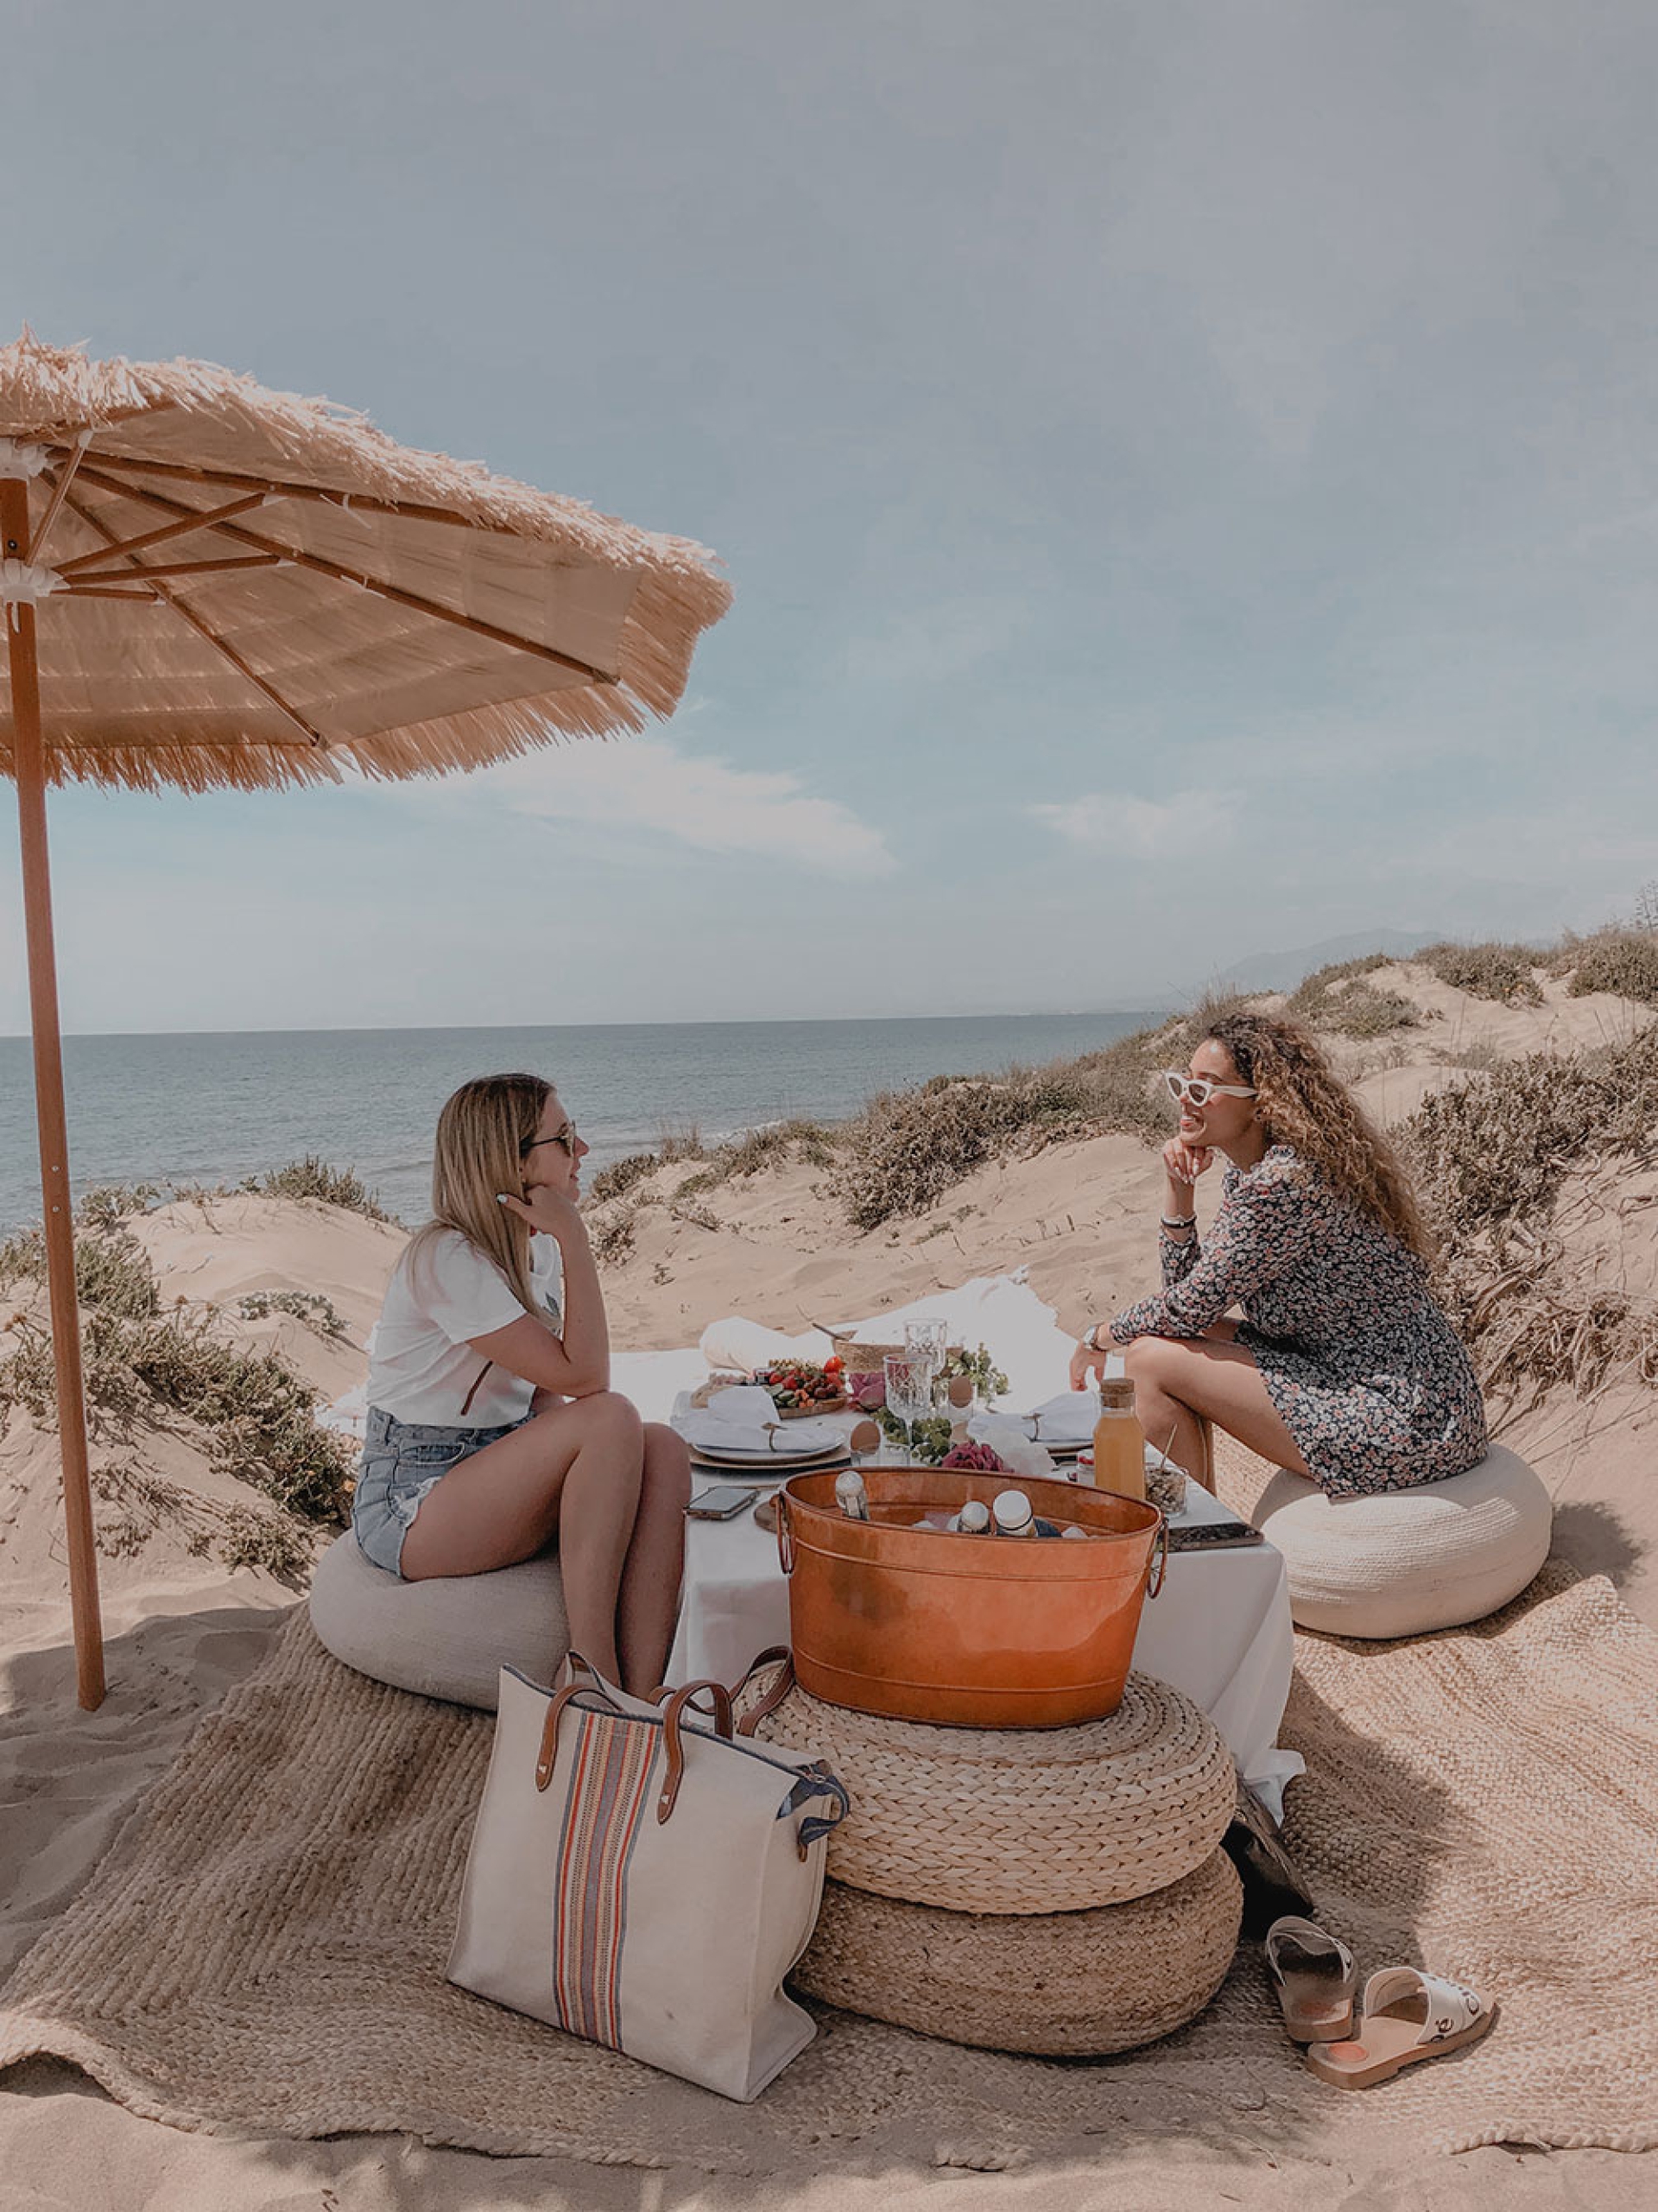 Your dream picnic in paradise